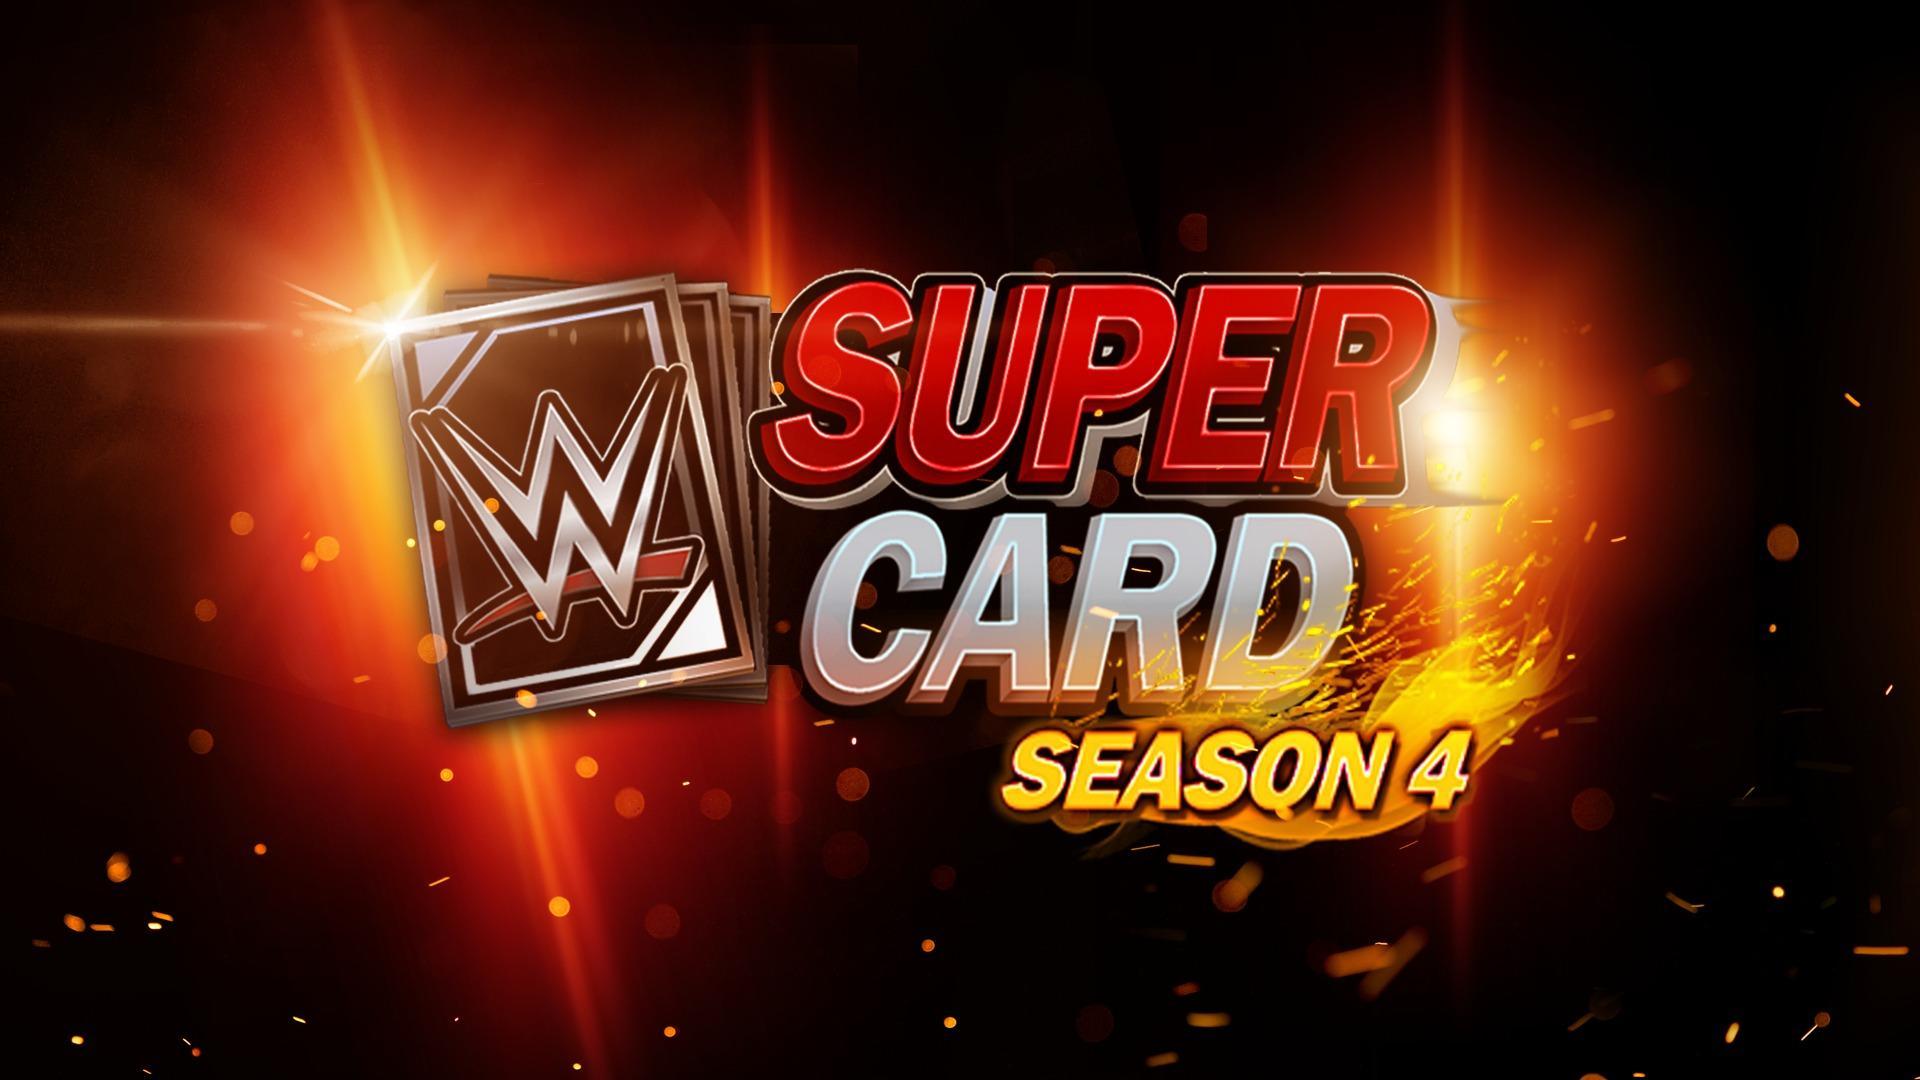 WWE SuperCard Season 4 Update Announced! Coming Soon to iOS & Android. WWE SuperCard News